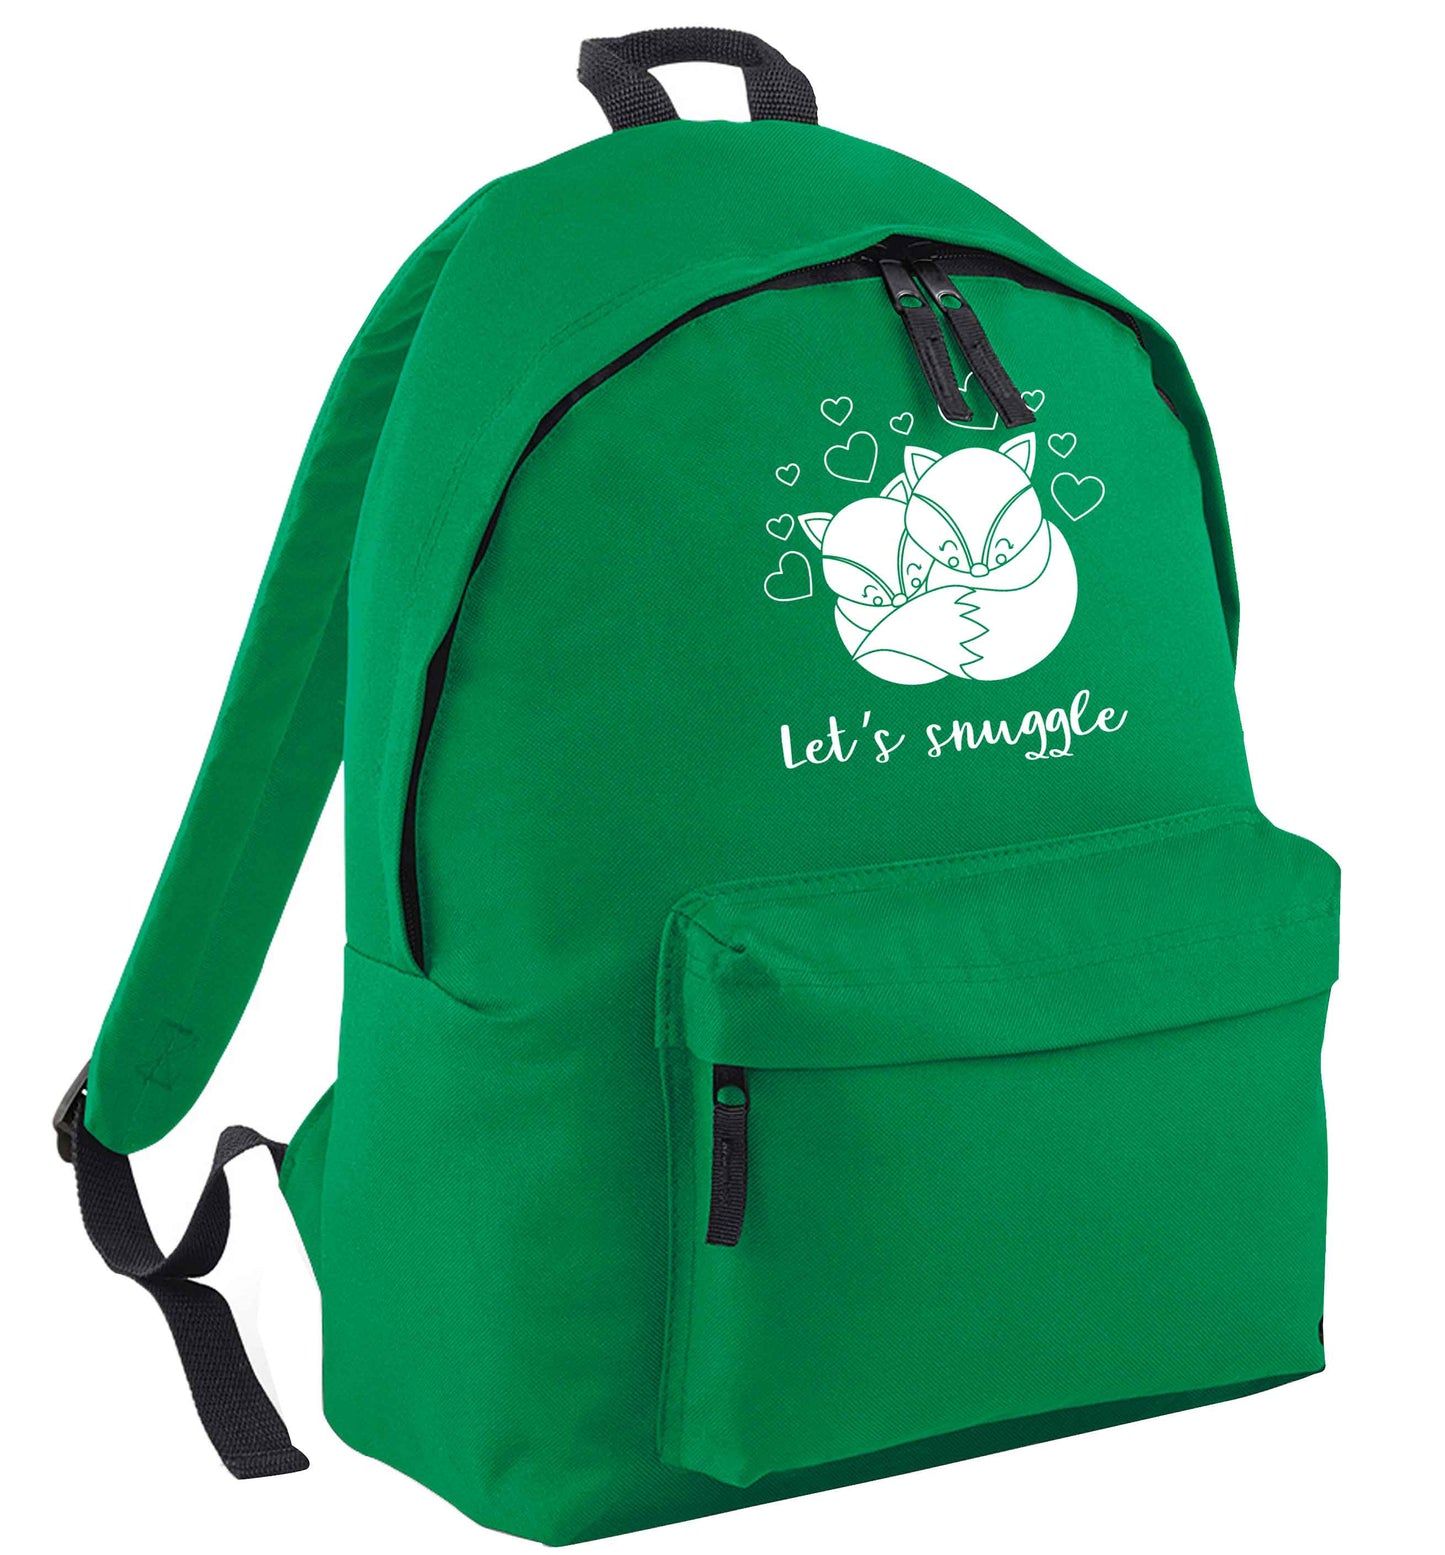 Let's snuggle green adults backpack